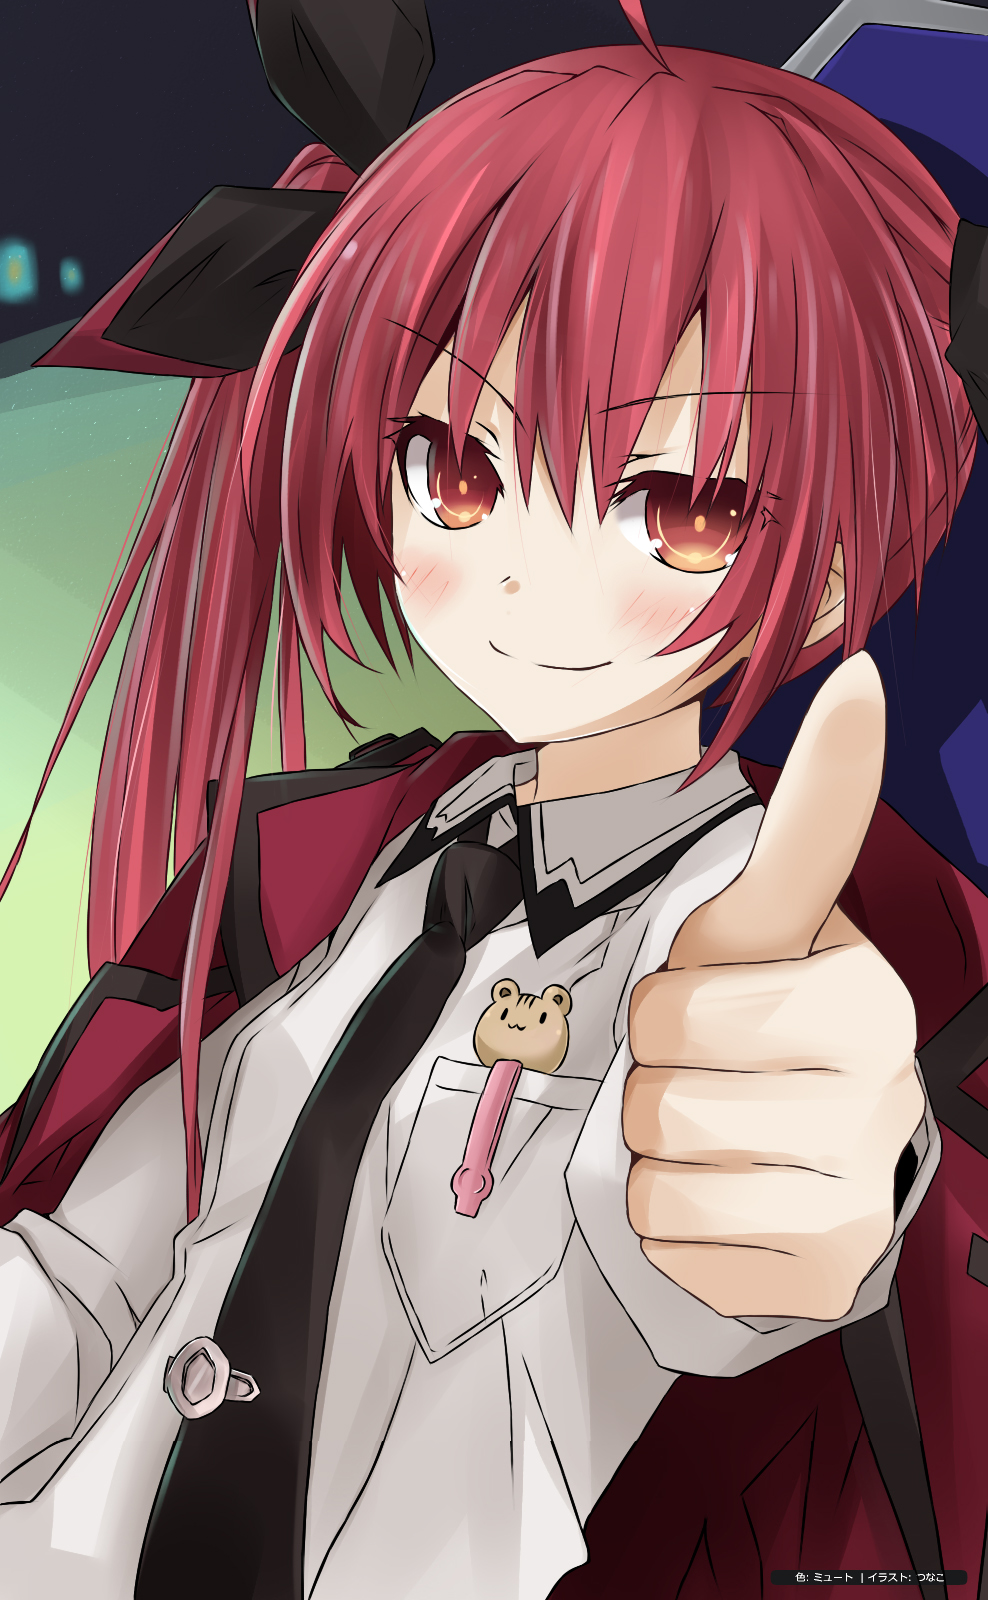 Anime cute anime thumbs up GIF on GIFER - by Taugore